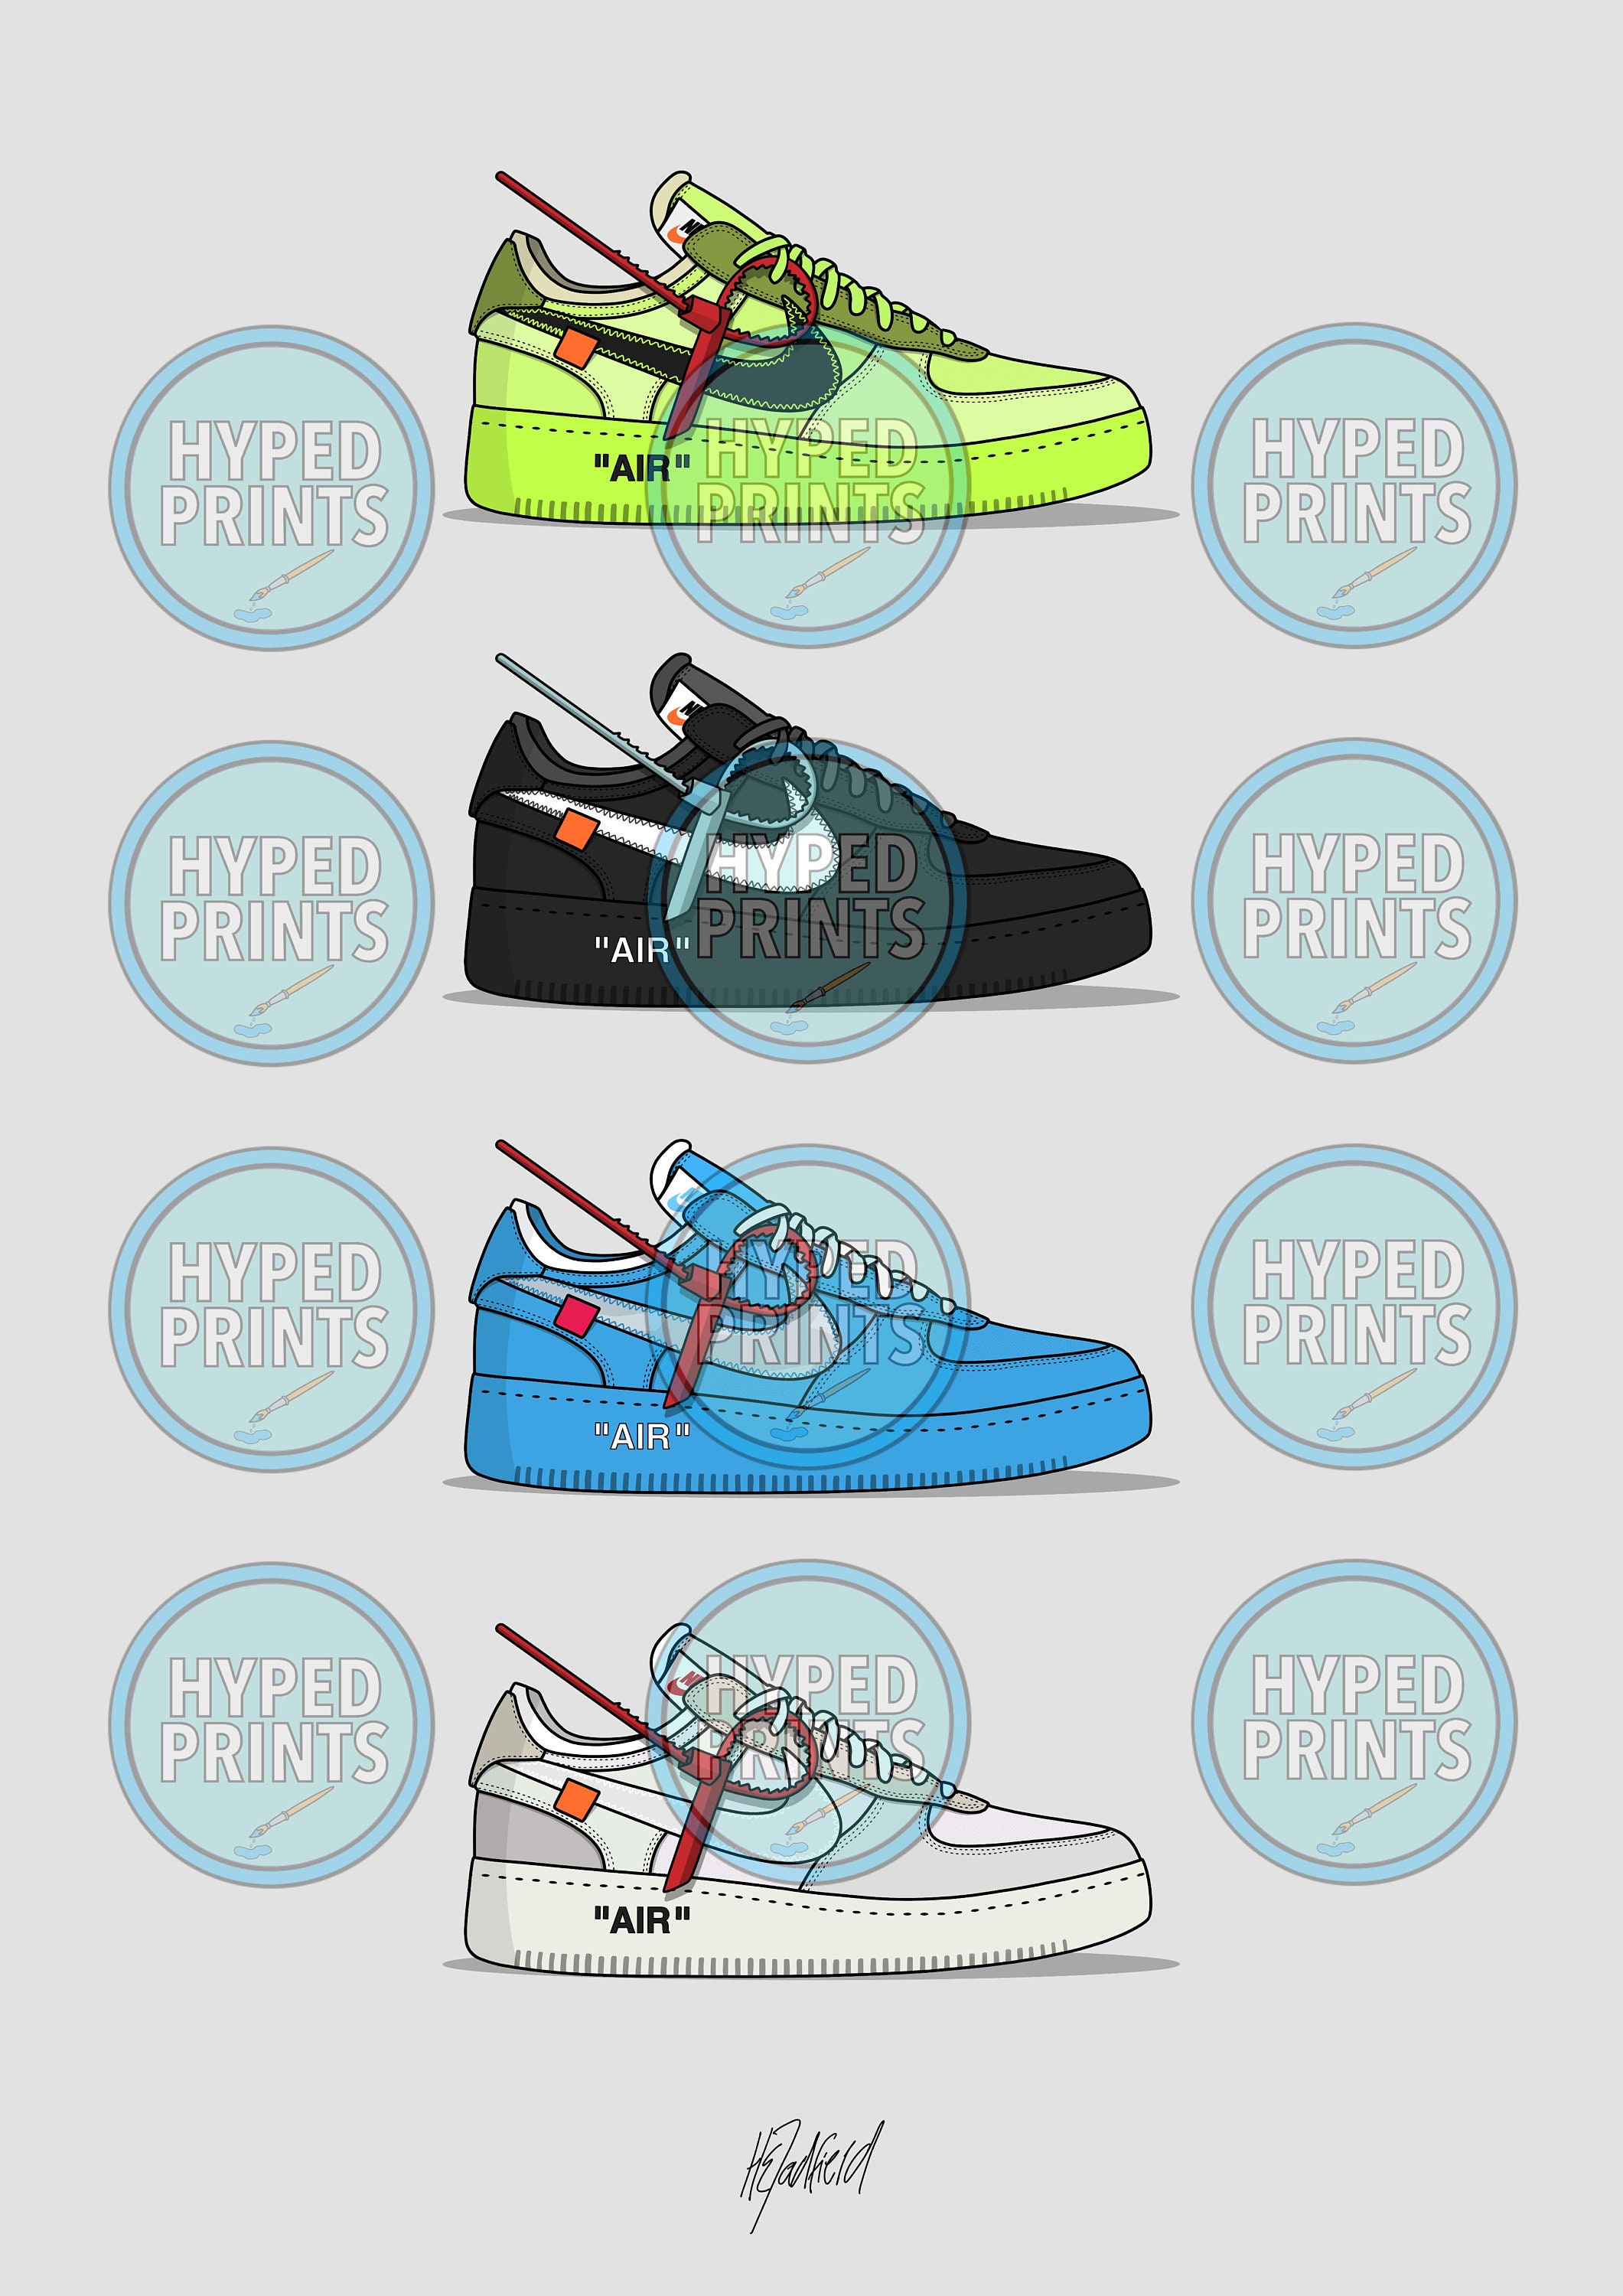 Nike Off-white Air Force 1 Hypebeast Sneaker Collection Poster - Etsy UK